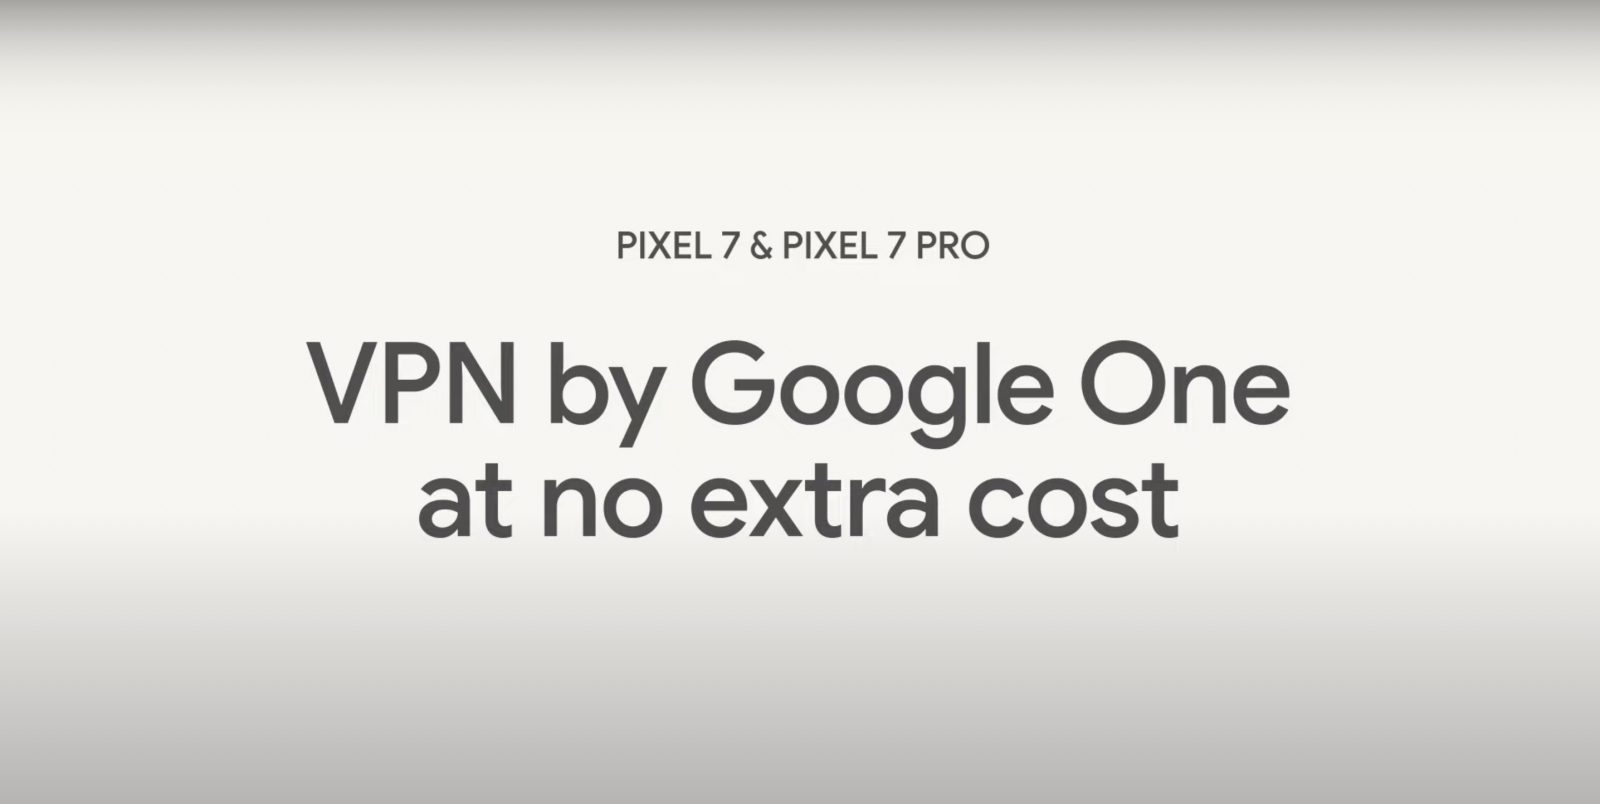 Google Pixel 7 users can access the VPN before the year-end